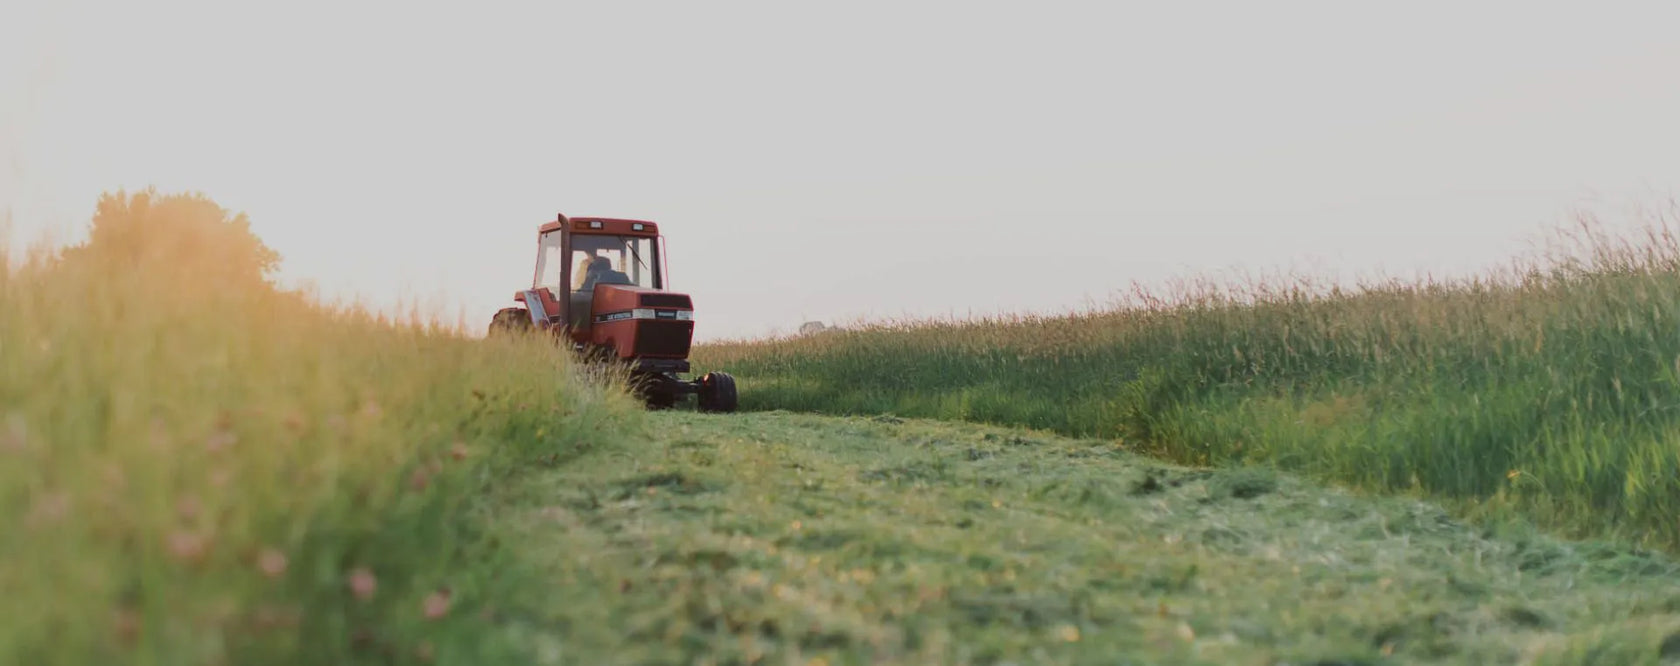 Tractor cutting hay in field